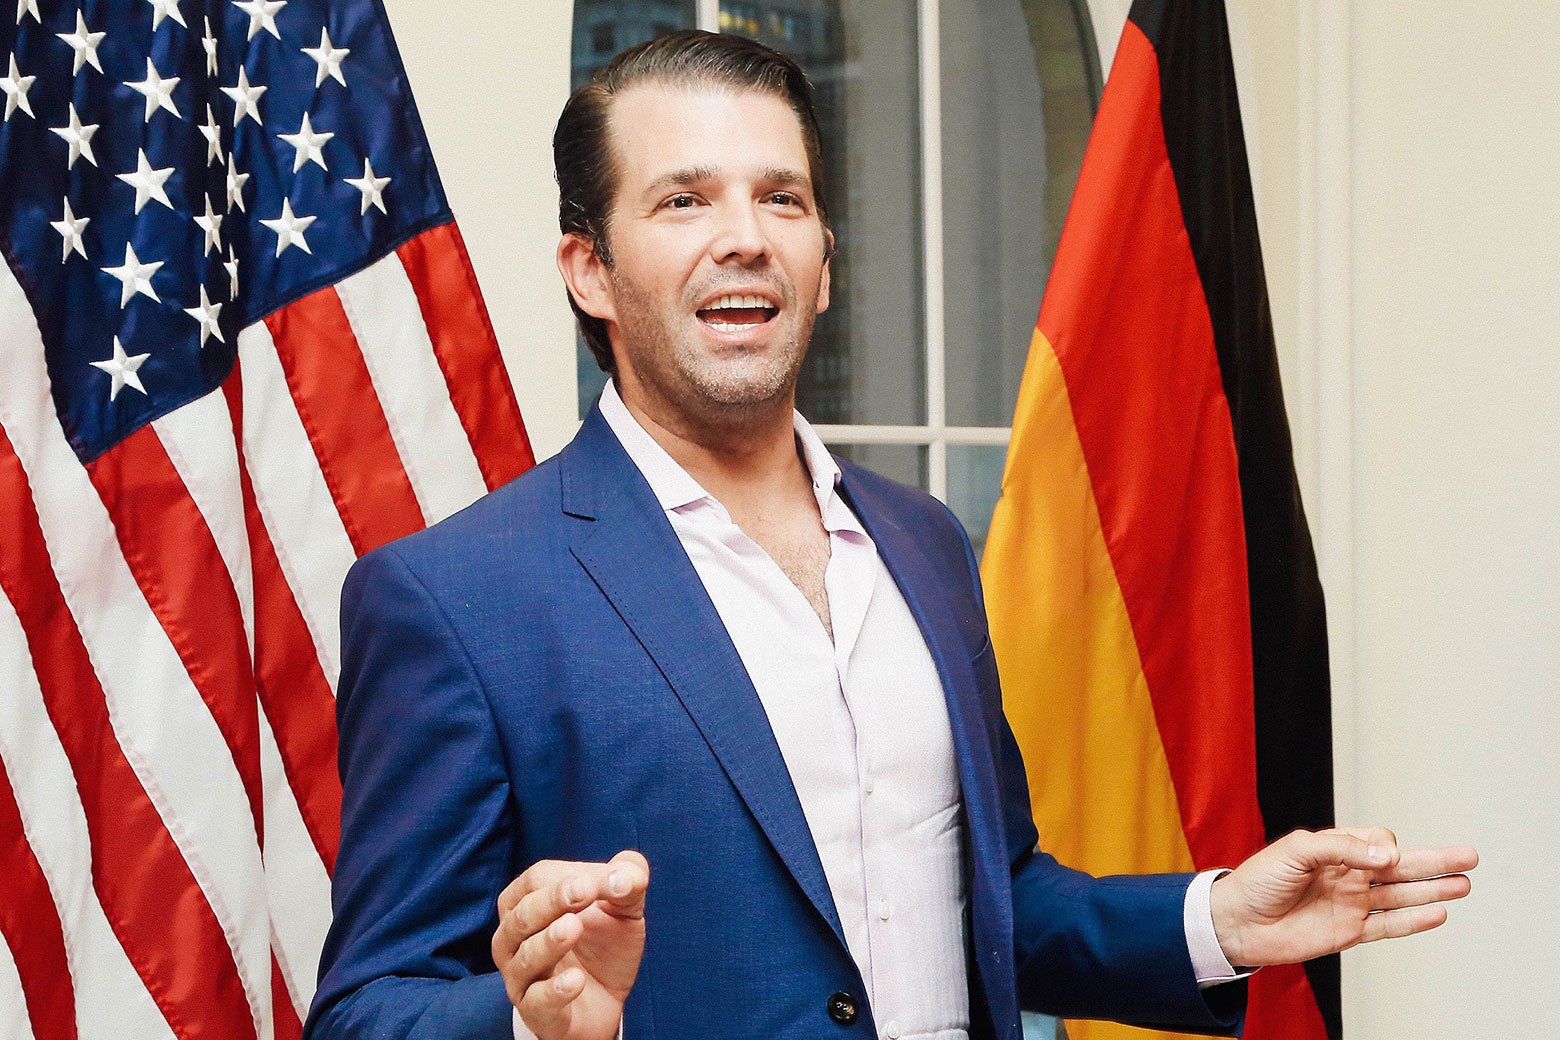 Donald Trump Jr. in front of American and German flags.